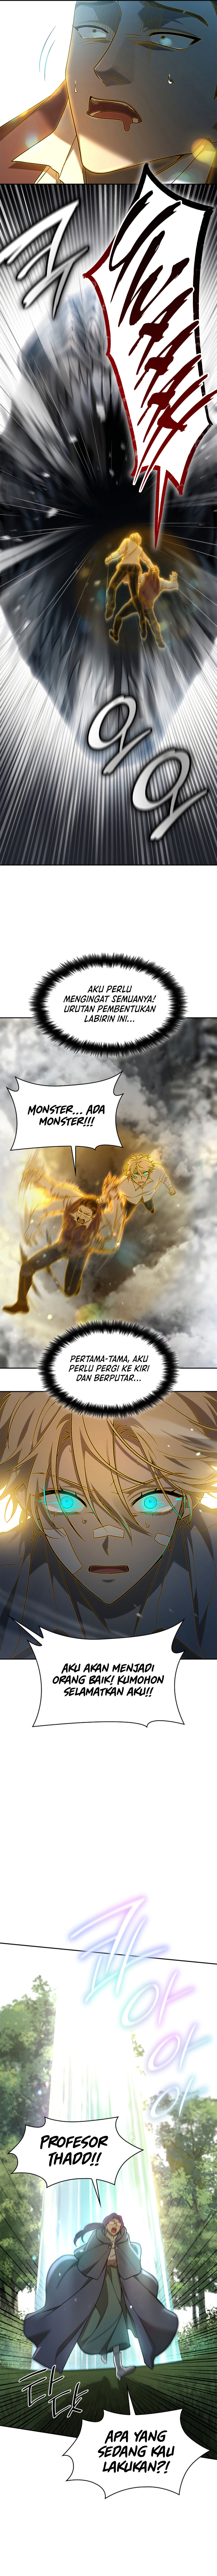 infinite-mage Chapter 38